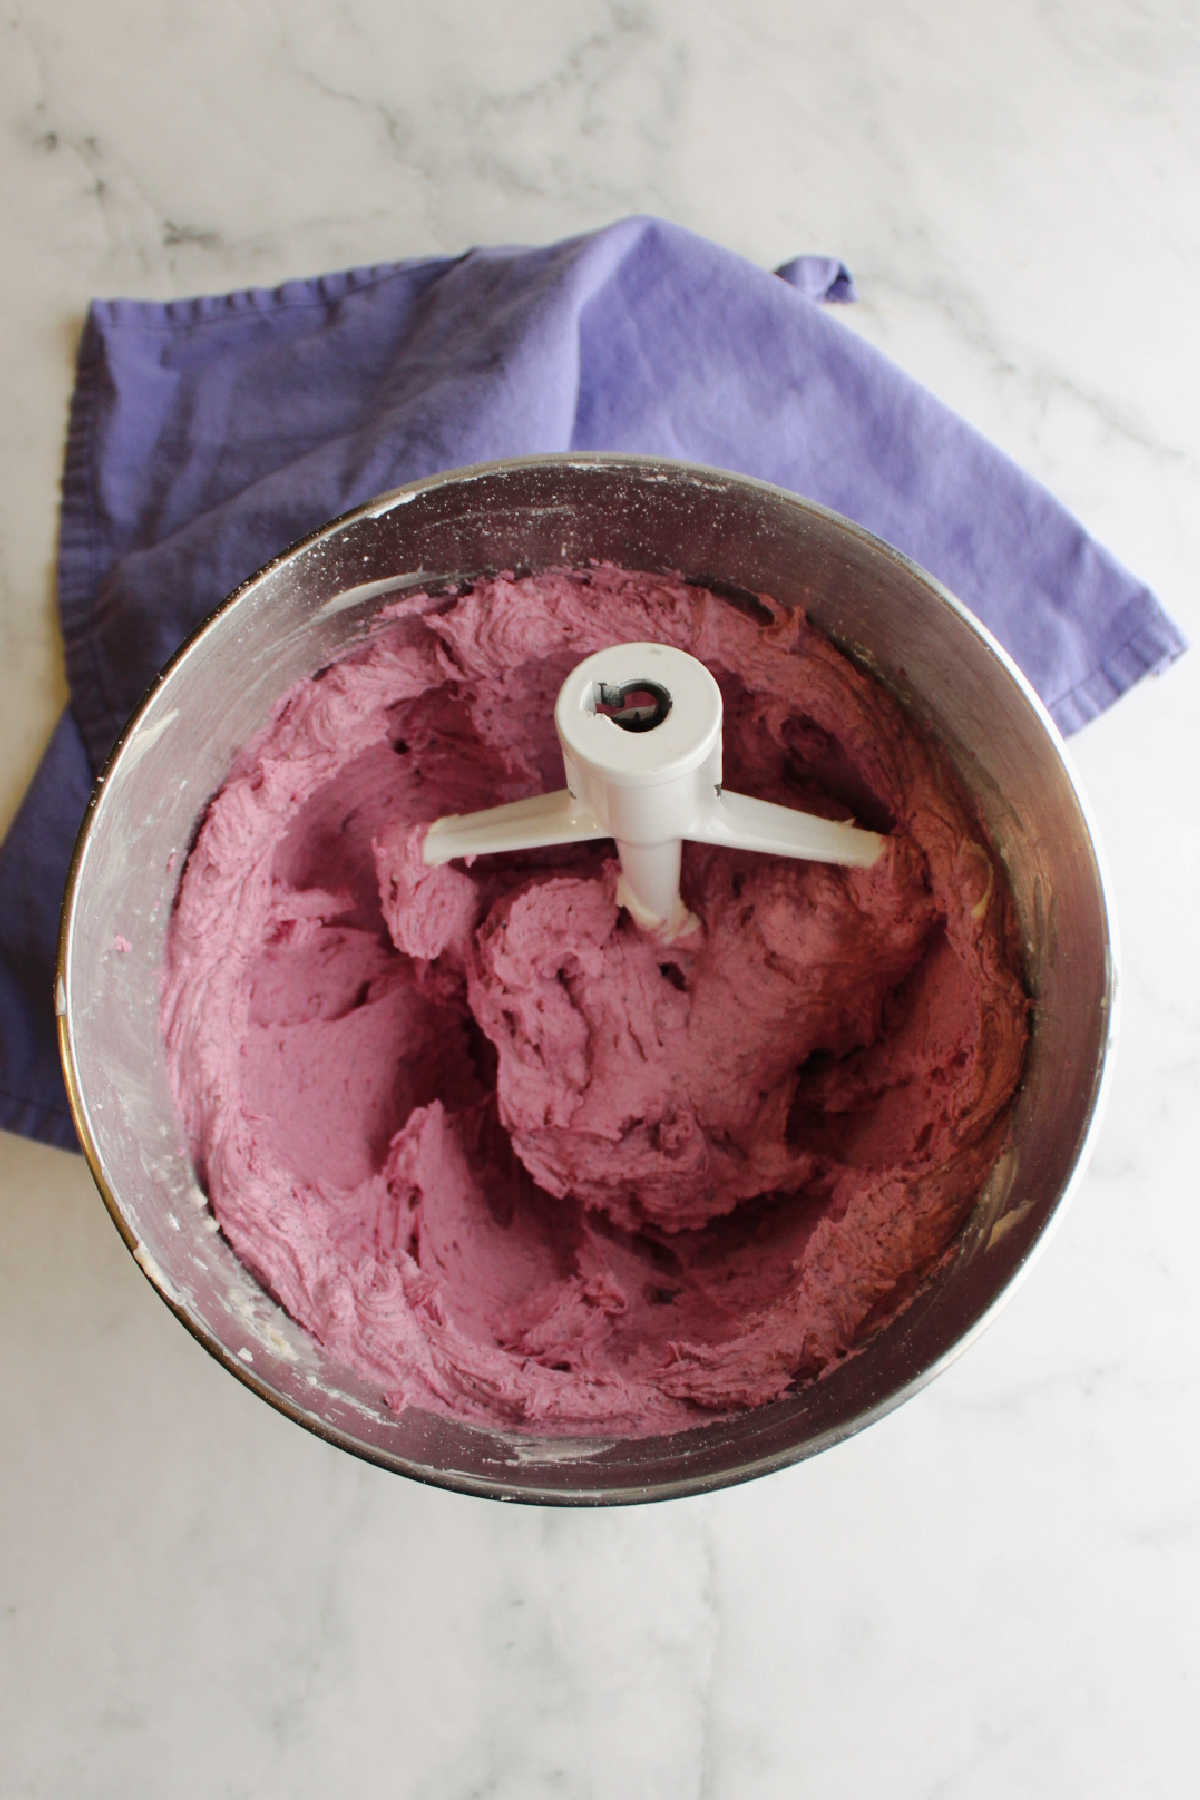 Mixer bowl filled with purple blueberry frosting.